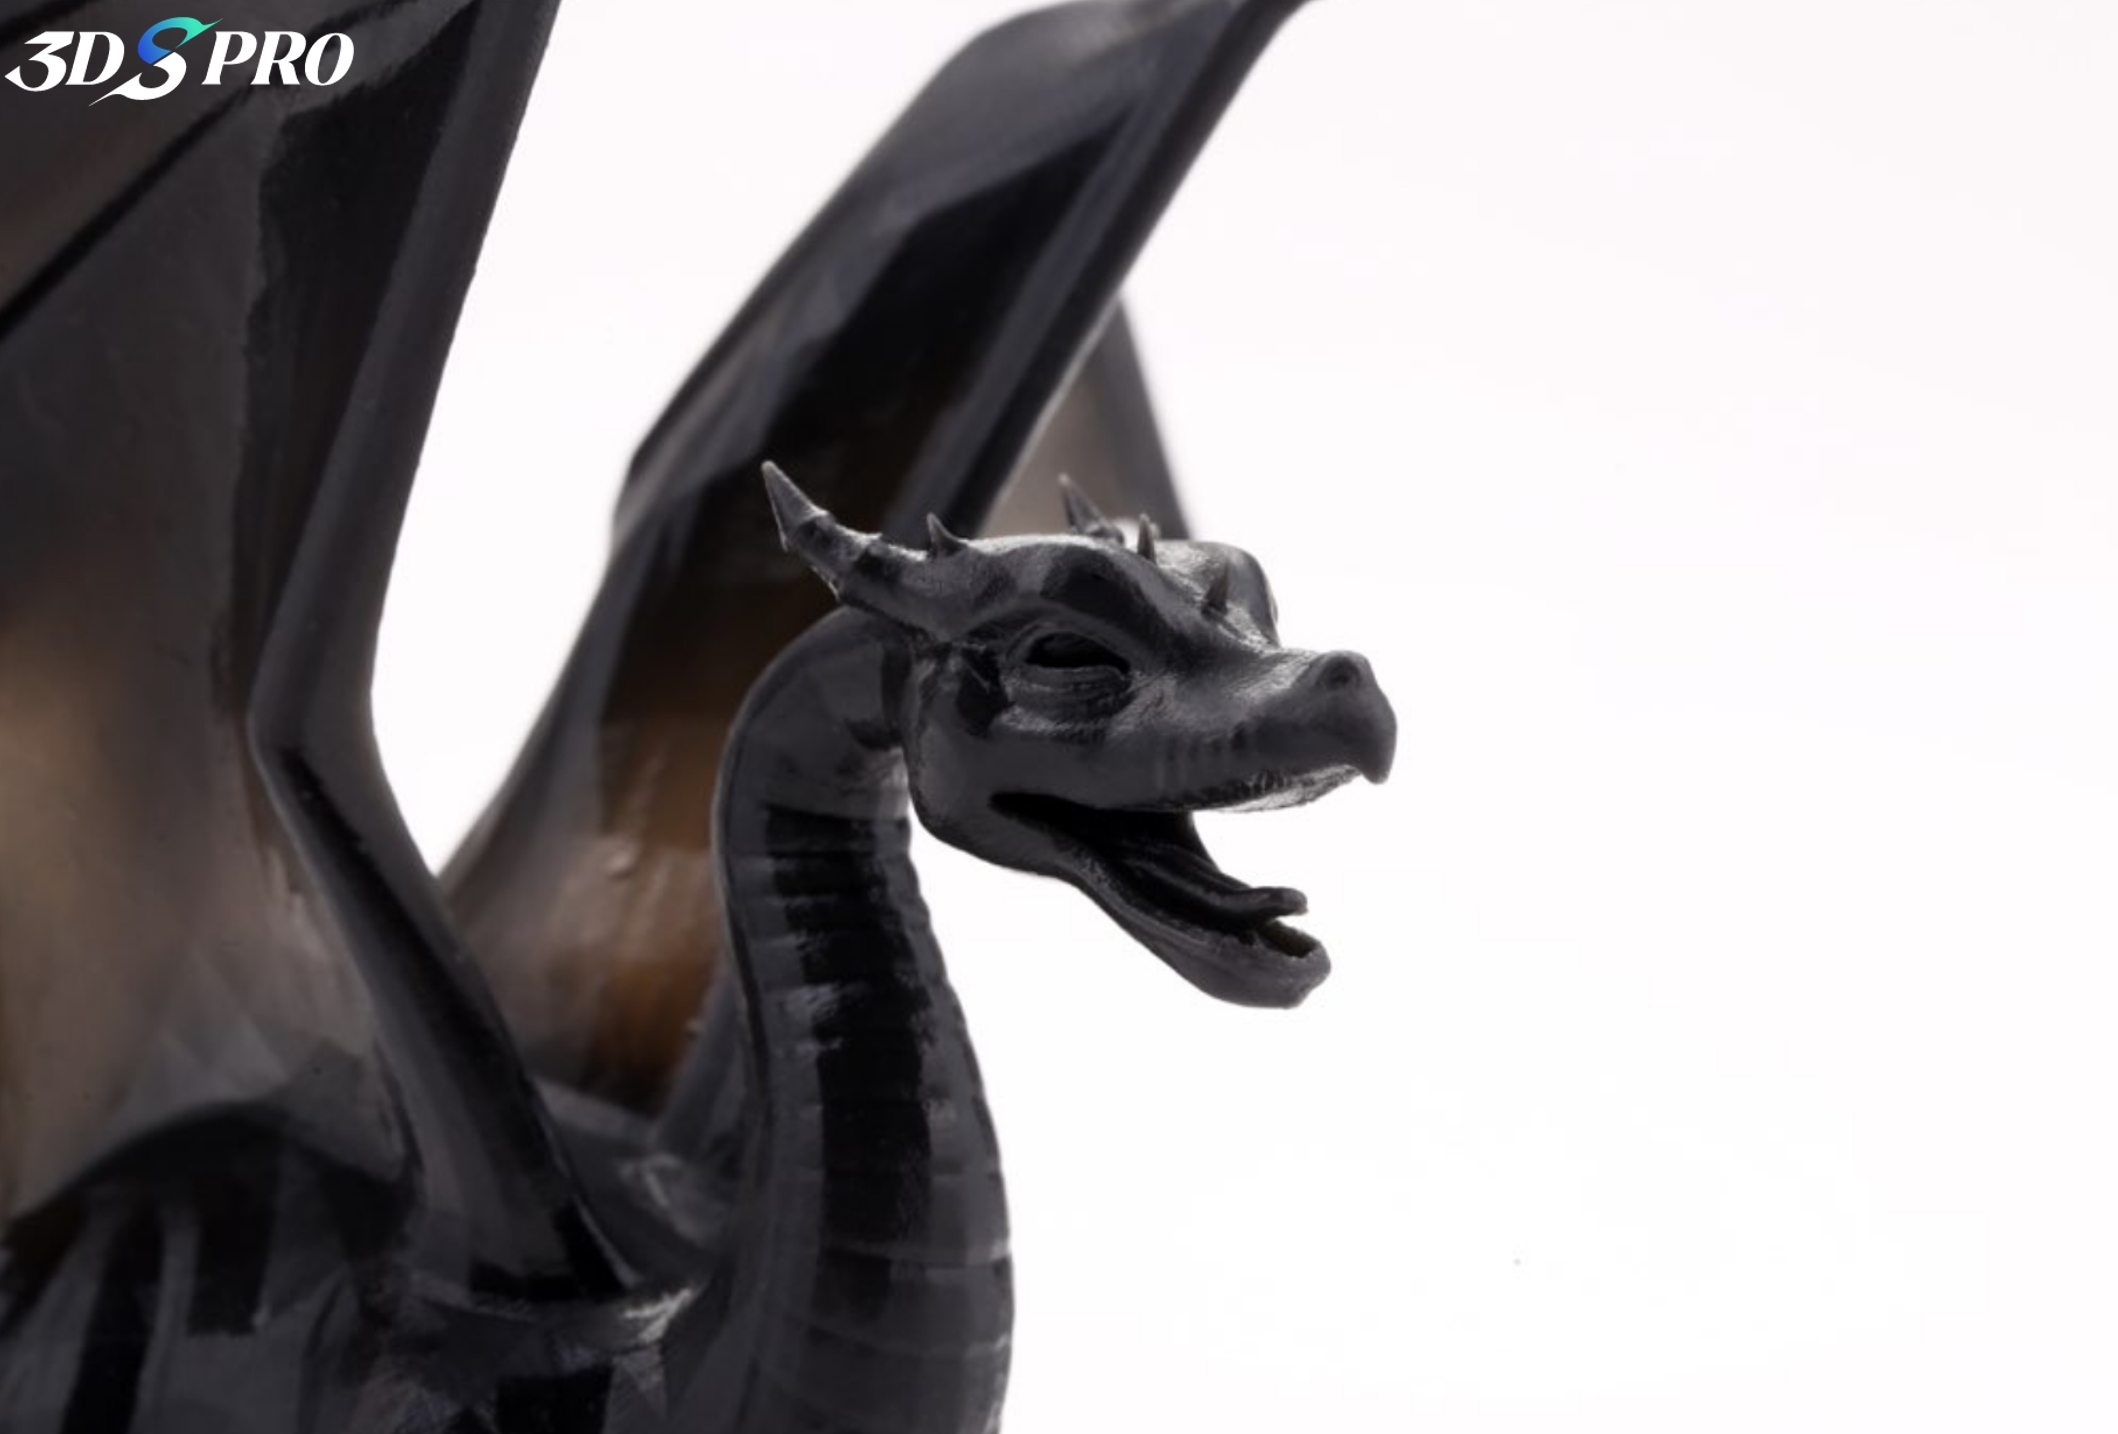 3DSPRO 3D-printed Dragon